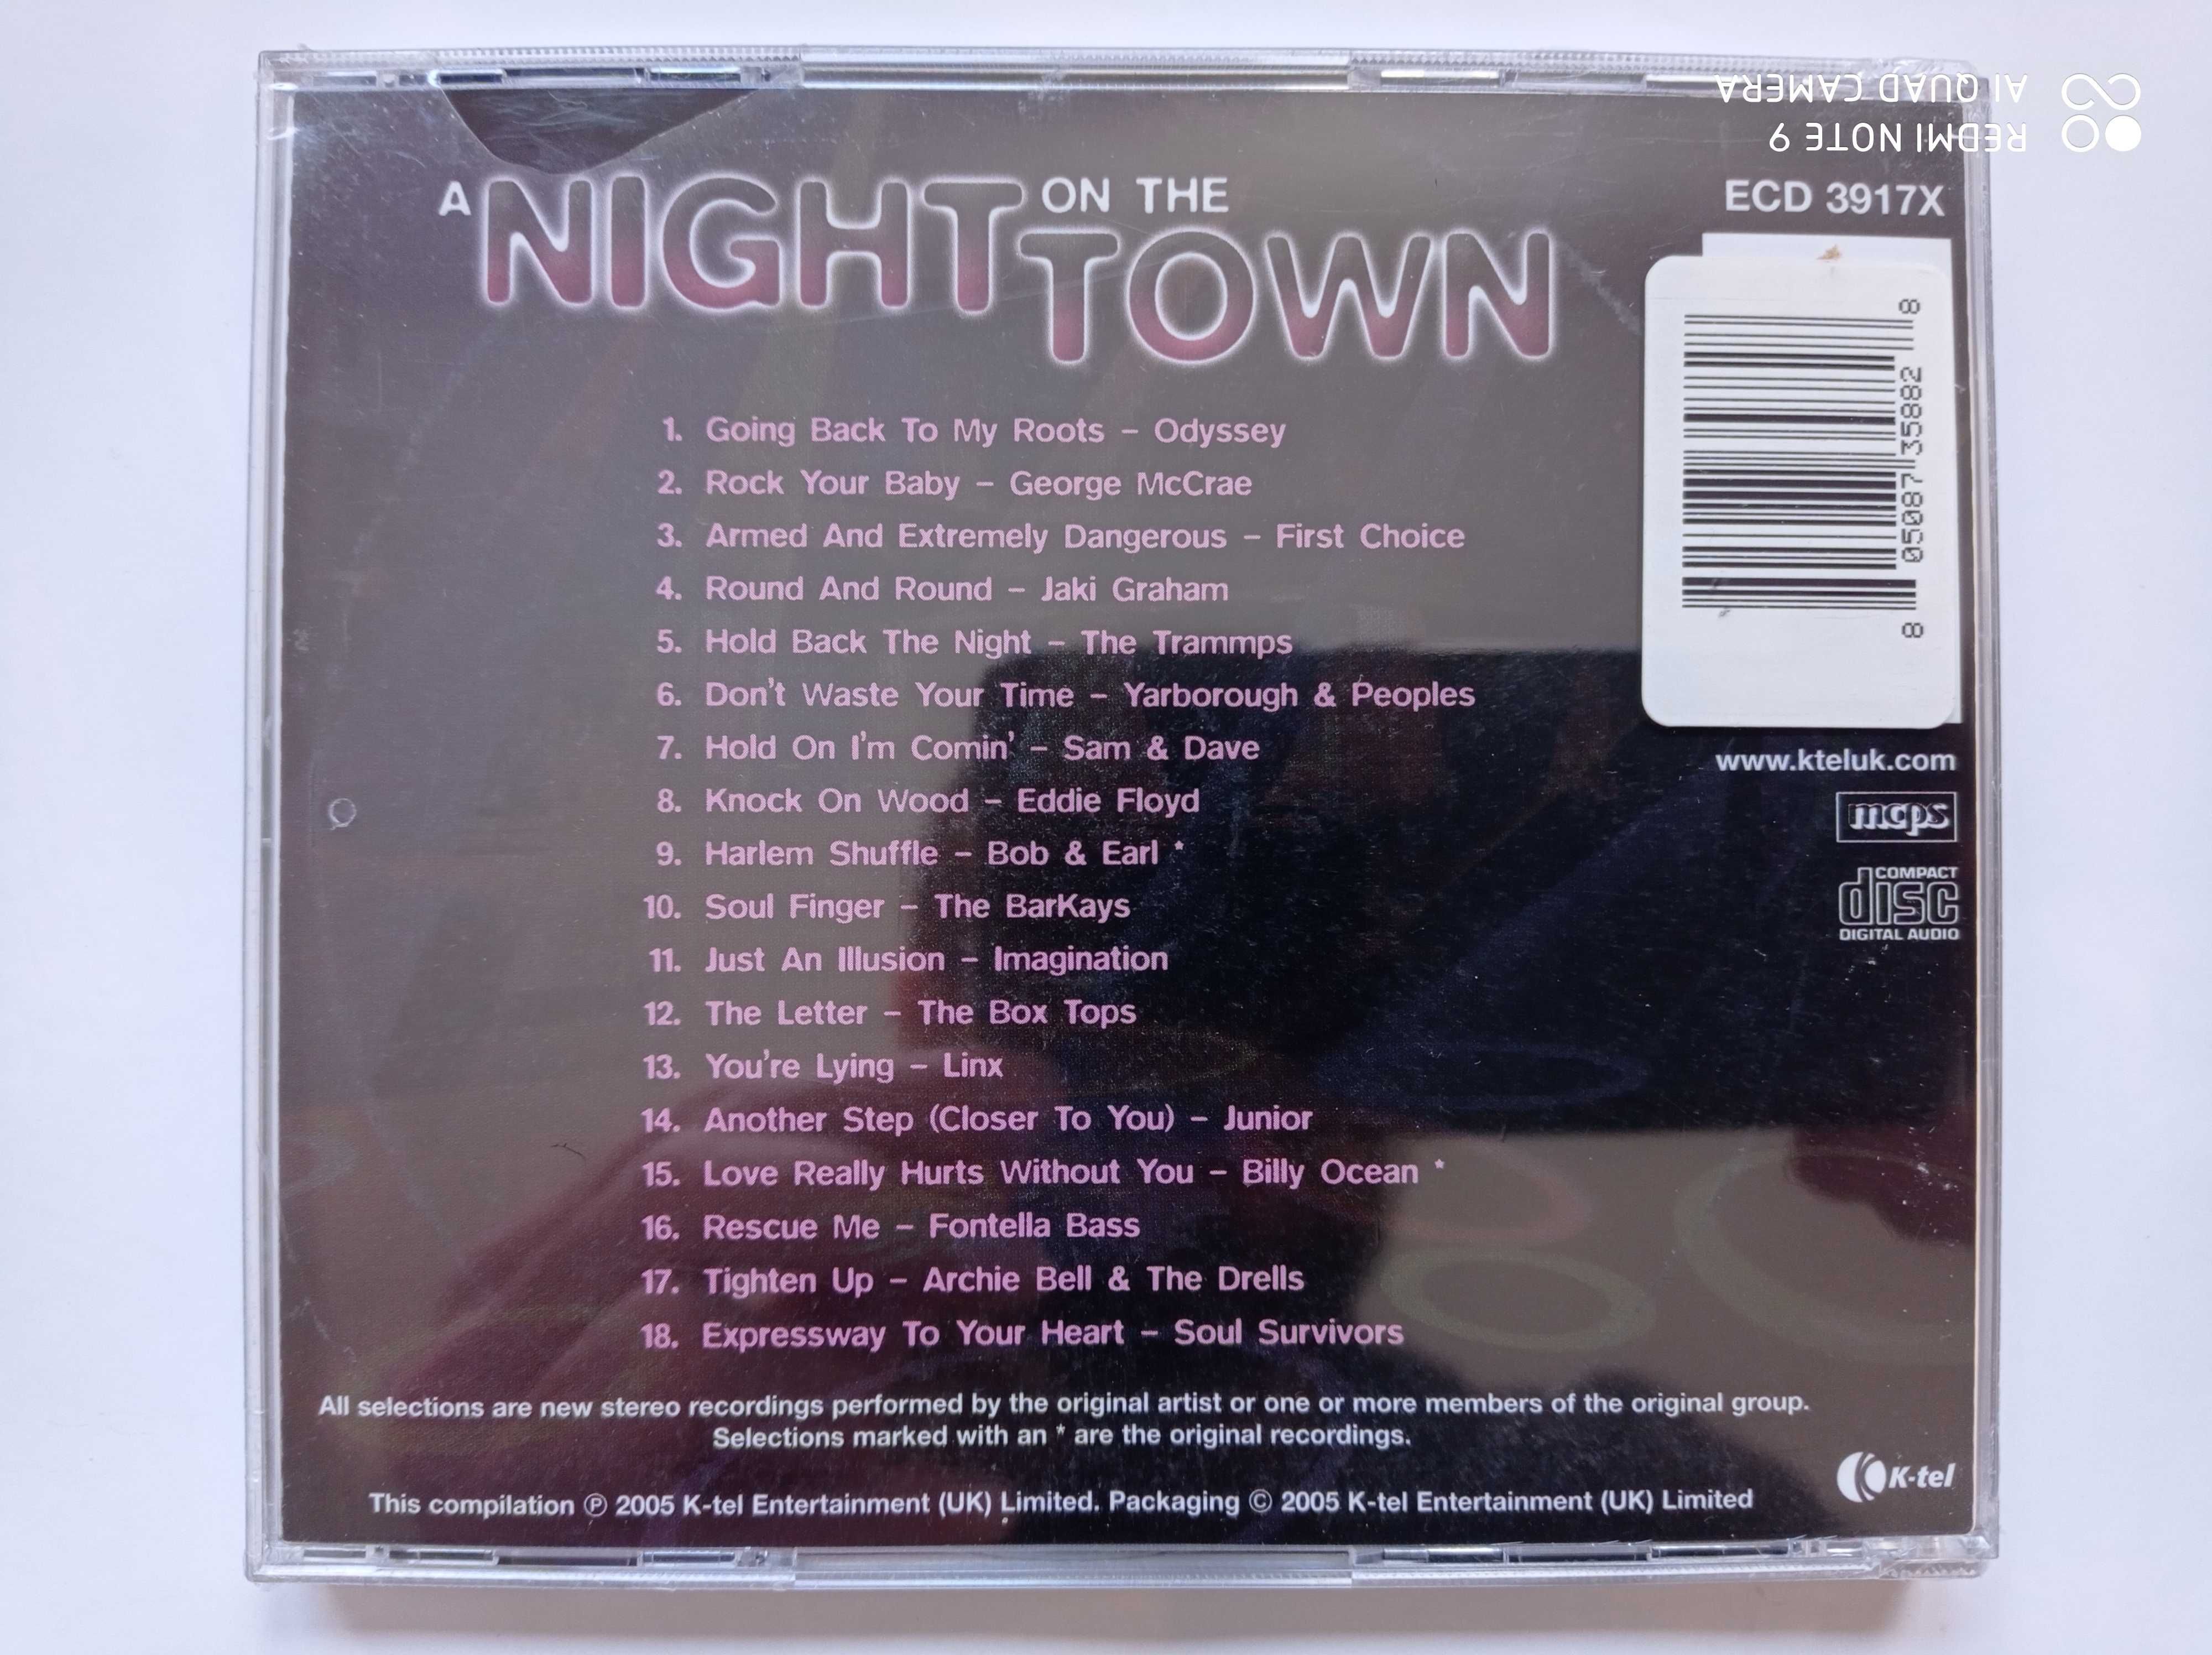 A Night On The Town: 18 Timeless Club Anthems - cd - nowa, folia